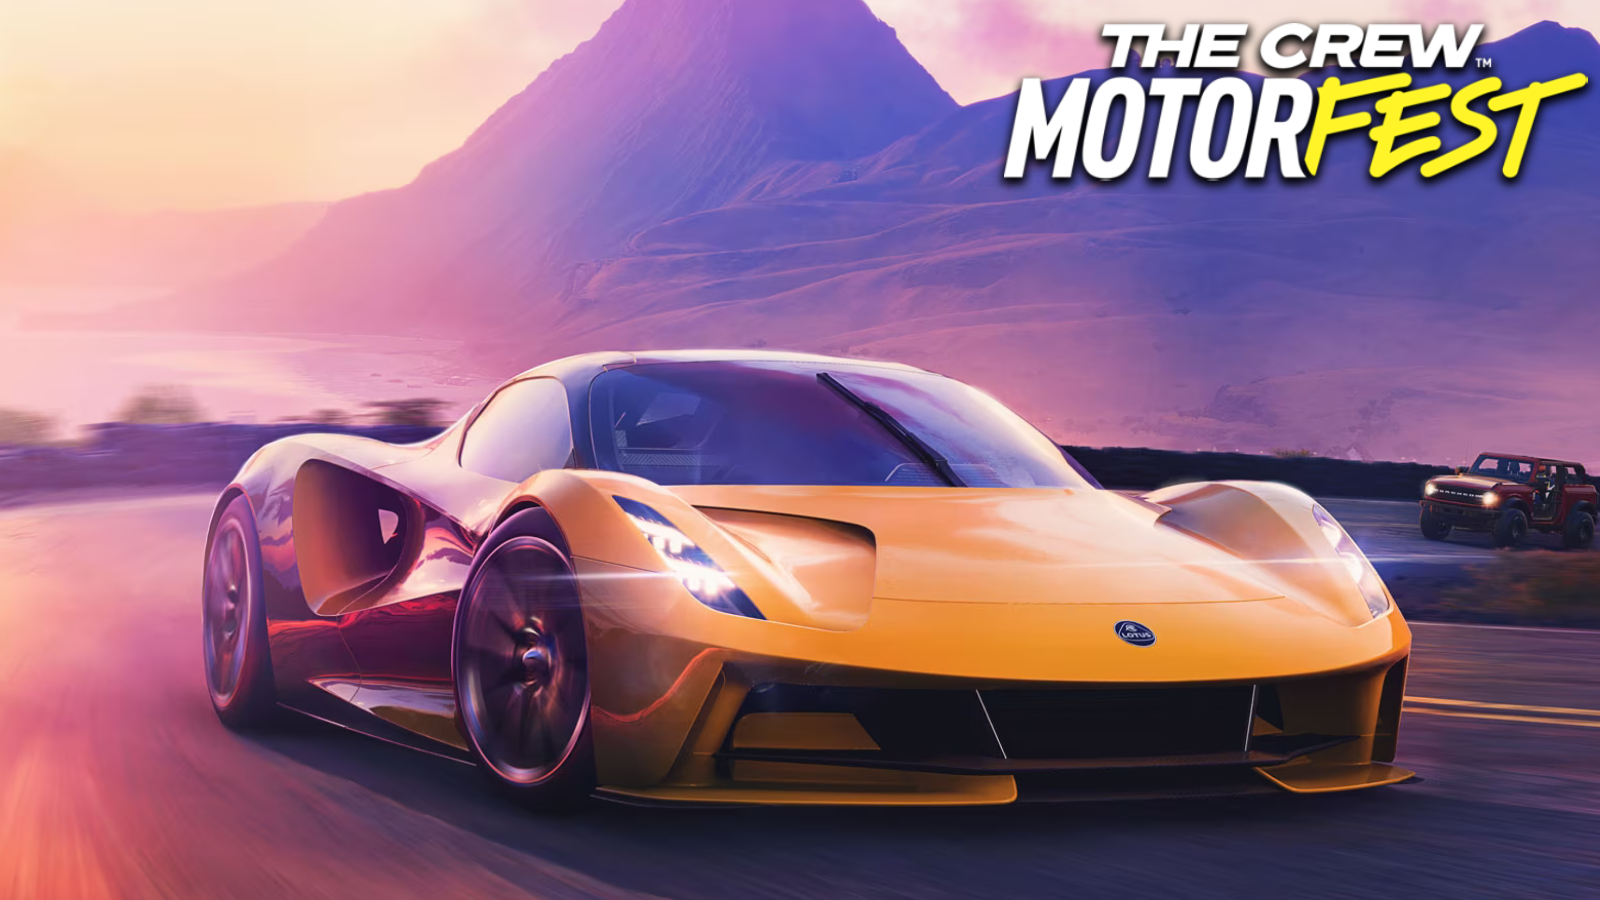 PS4 - how to download The Crew 2 Open Beta Por Ps4 [Free Open Beta] 